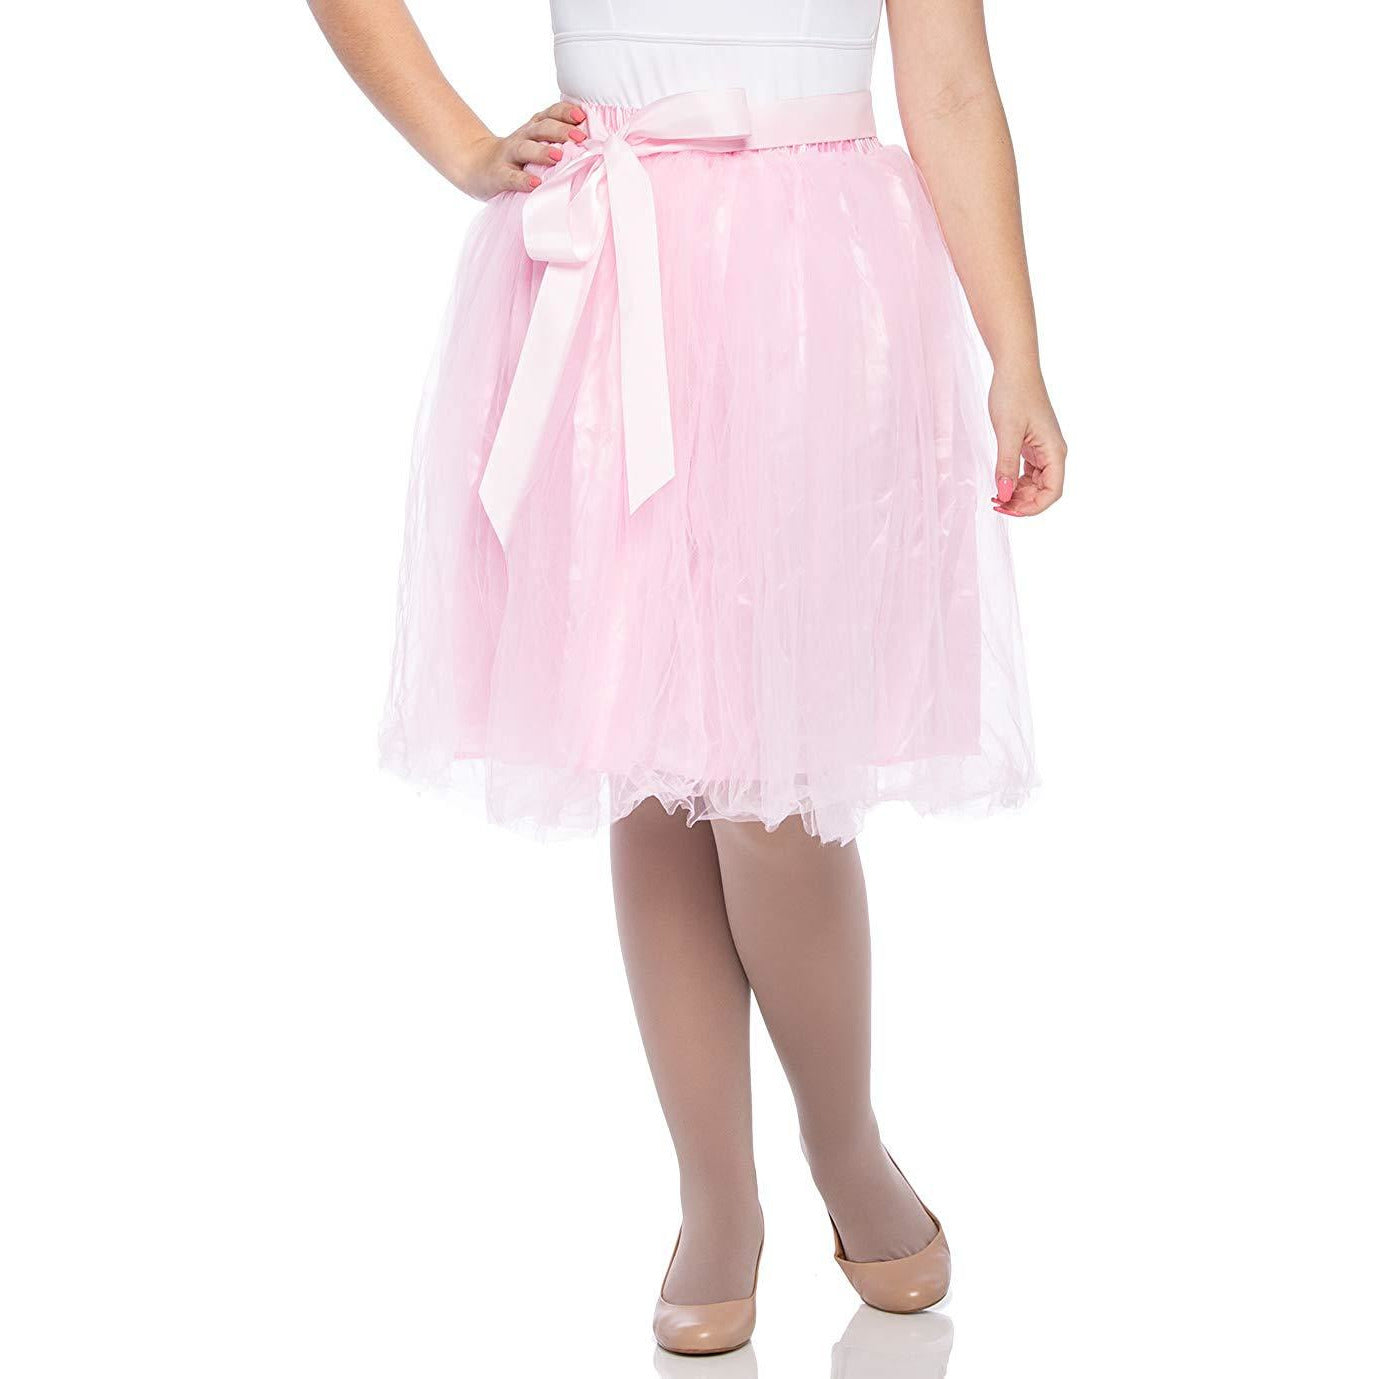 Adults & Girls A-line Knee Length Tutu Tulle Skirt - Regular and Plus Size in Pink